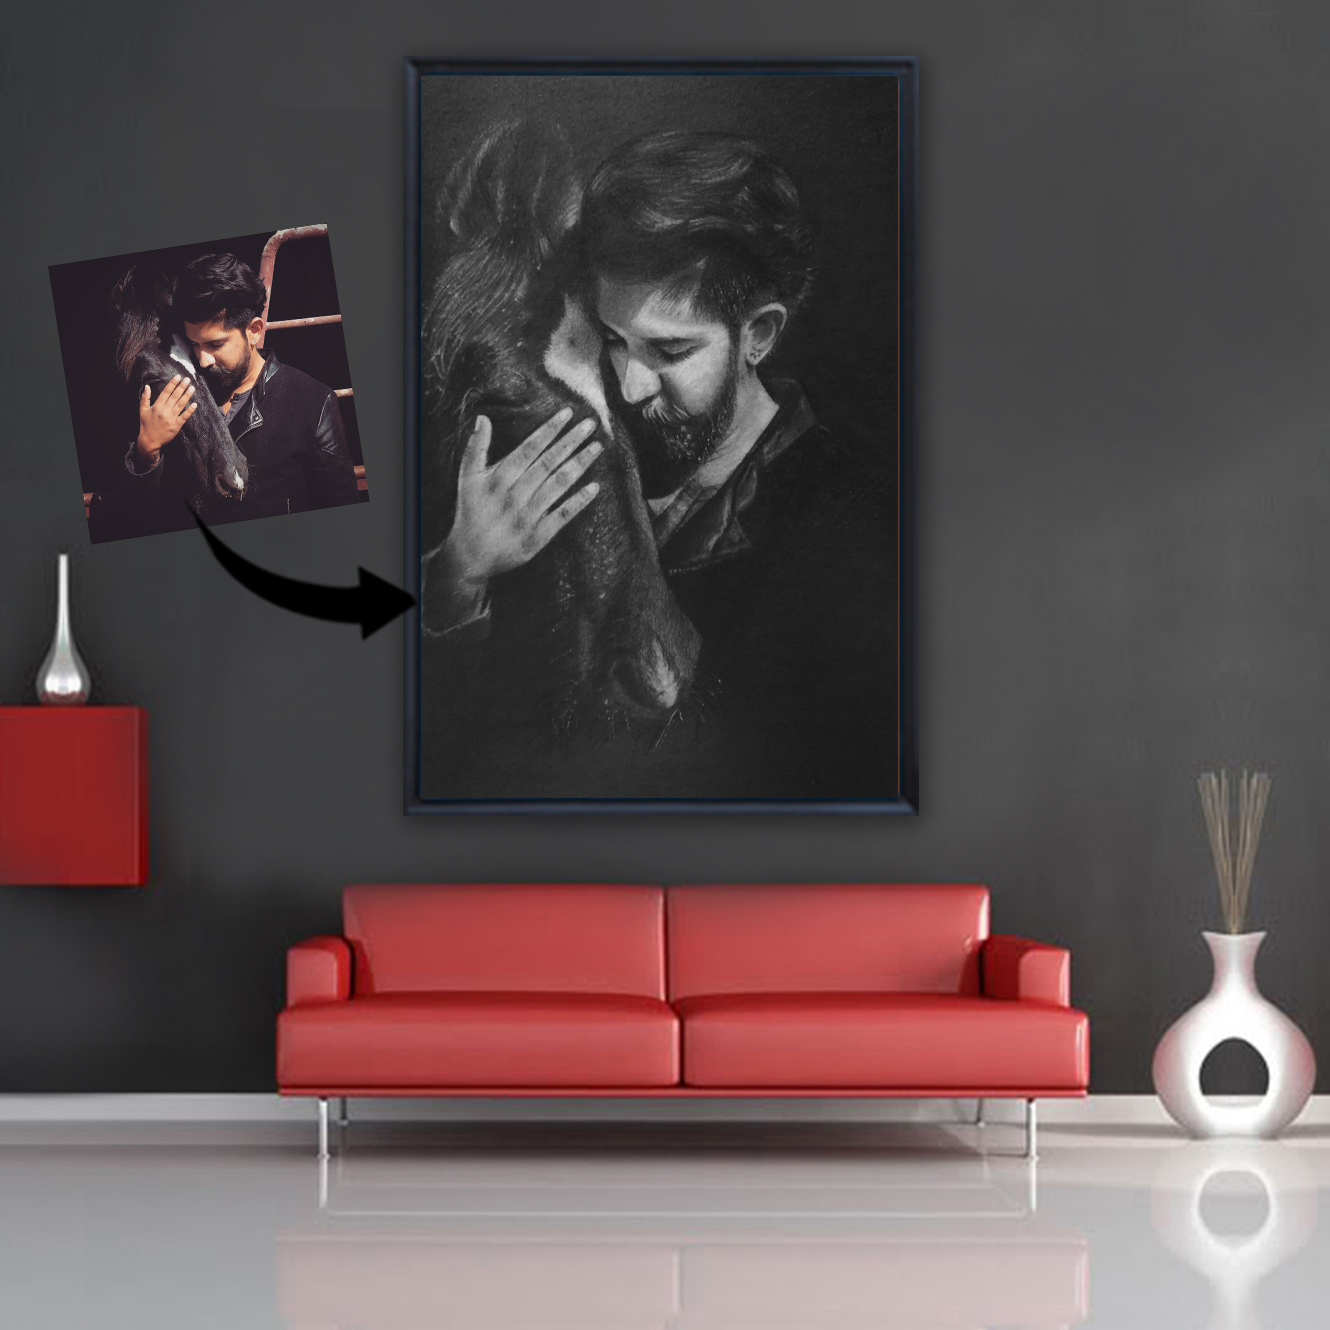 Ever heard of PortraitFlip? PortraitFlip is the one stop to turn photo into paintings and turn our moments into beautiful memories #memories #photo #portrait #painting #portraitflip #canvasprint #charcoalsketch